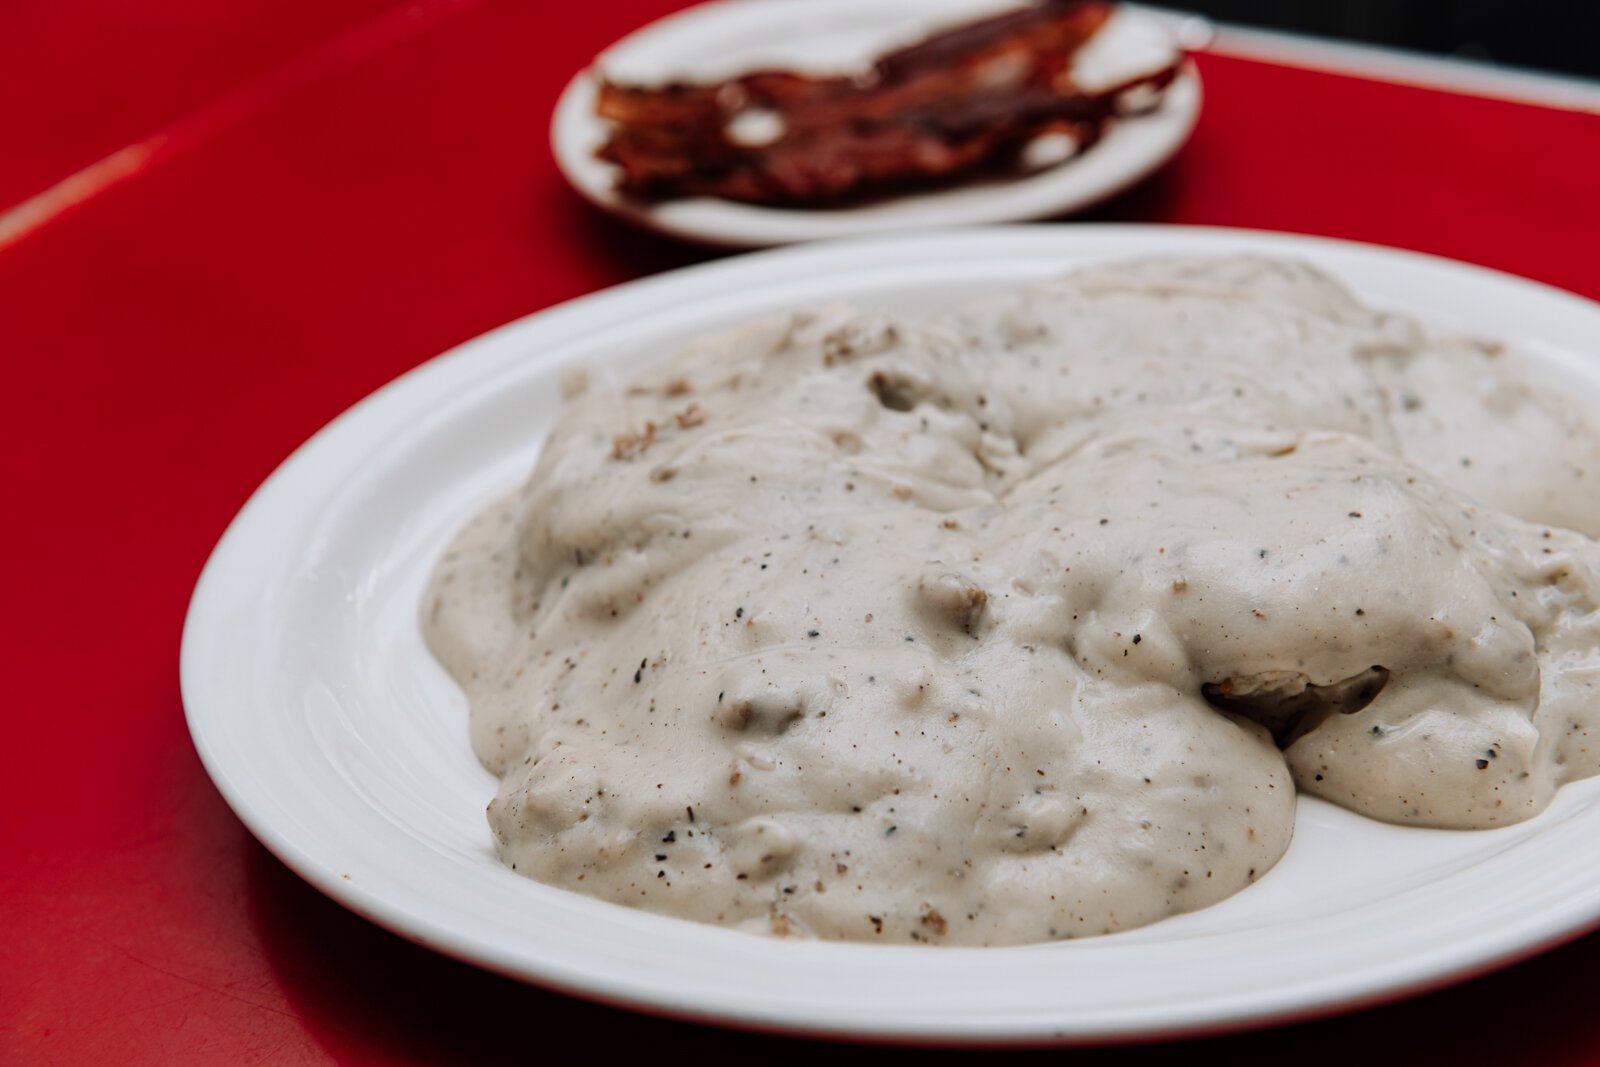 The country sausage gravy and biscuits with a side of bacon at Cindy's Diner, 230 W. Berry St.